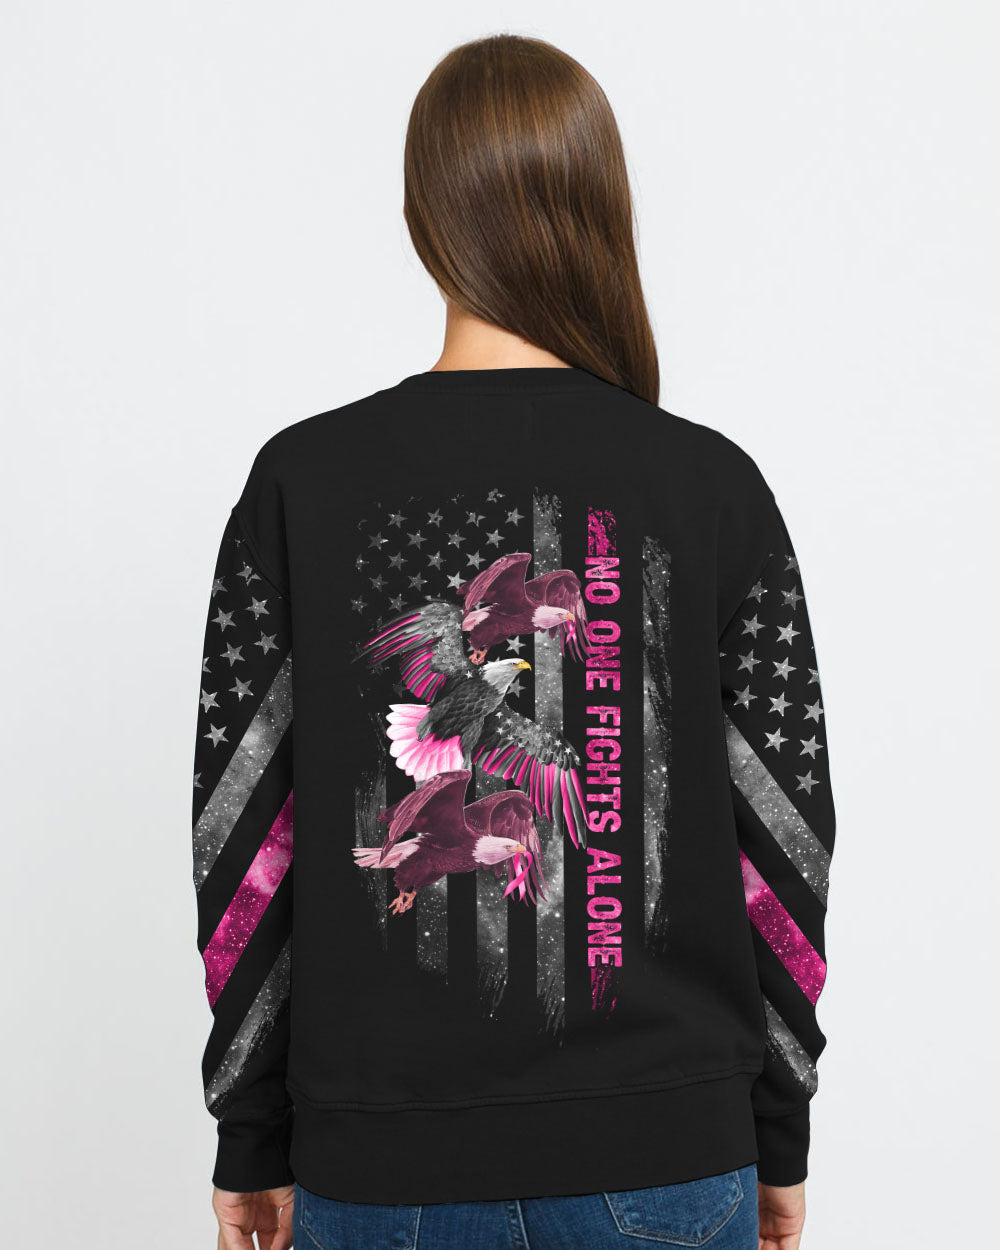 No One Fights Alone Eagle Flag Women's Breast Cancer Awareness Sweatshirt